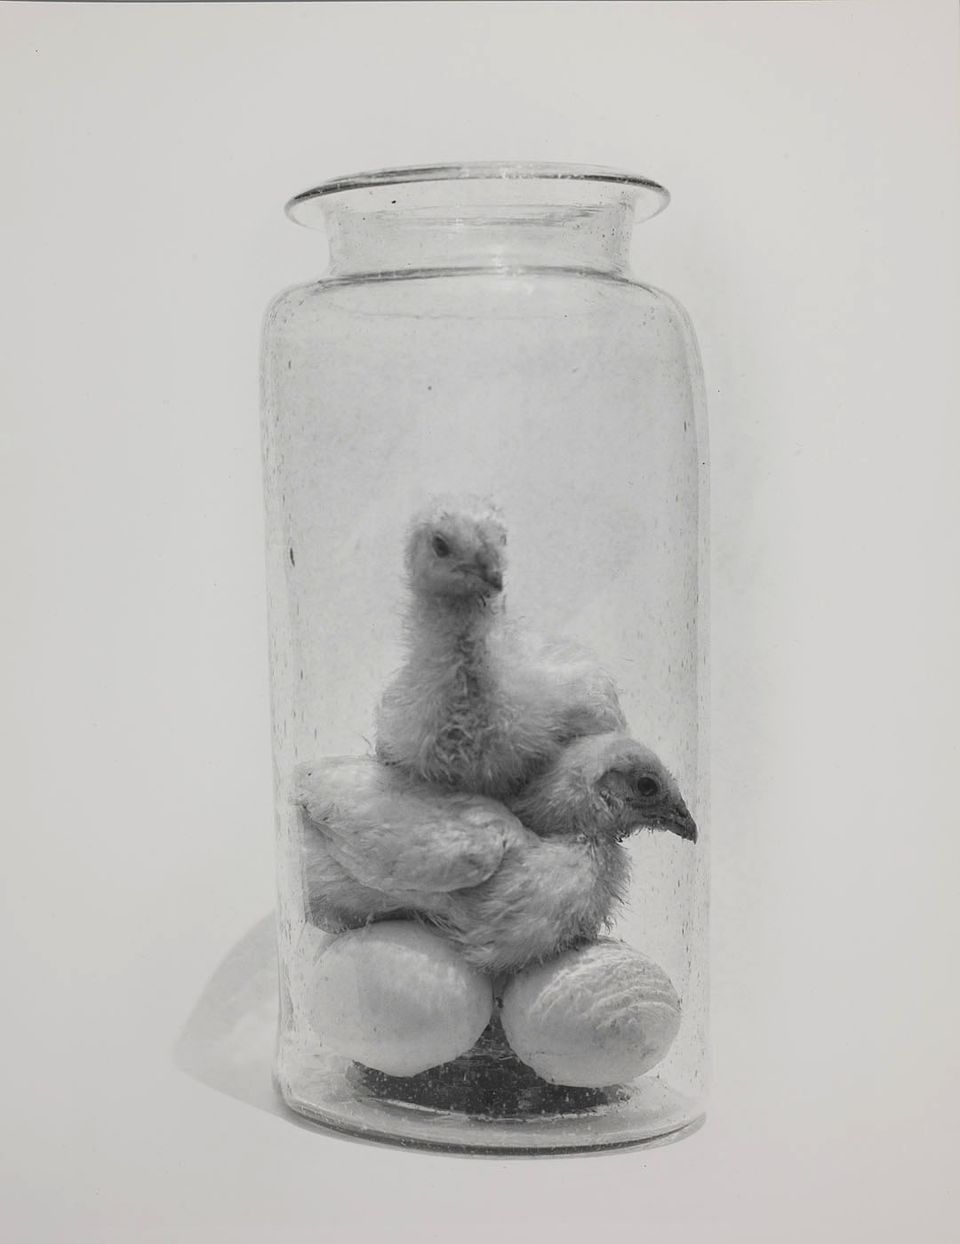 A photograph of baby chickens in a jar. 